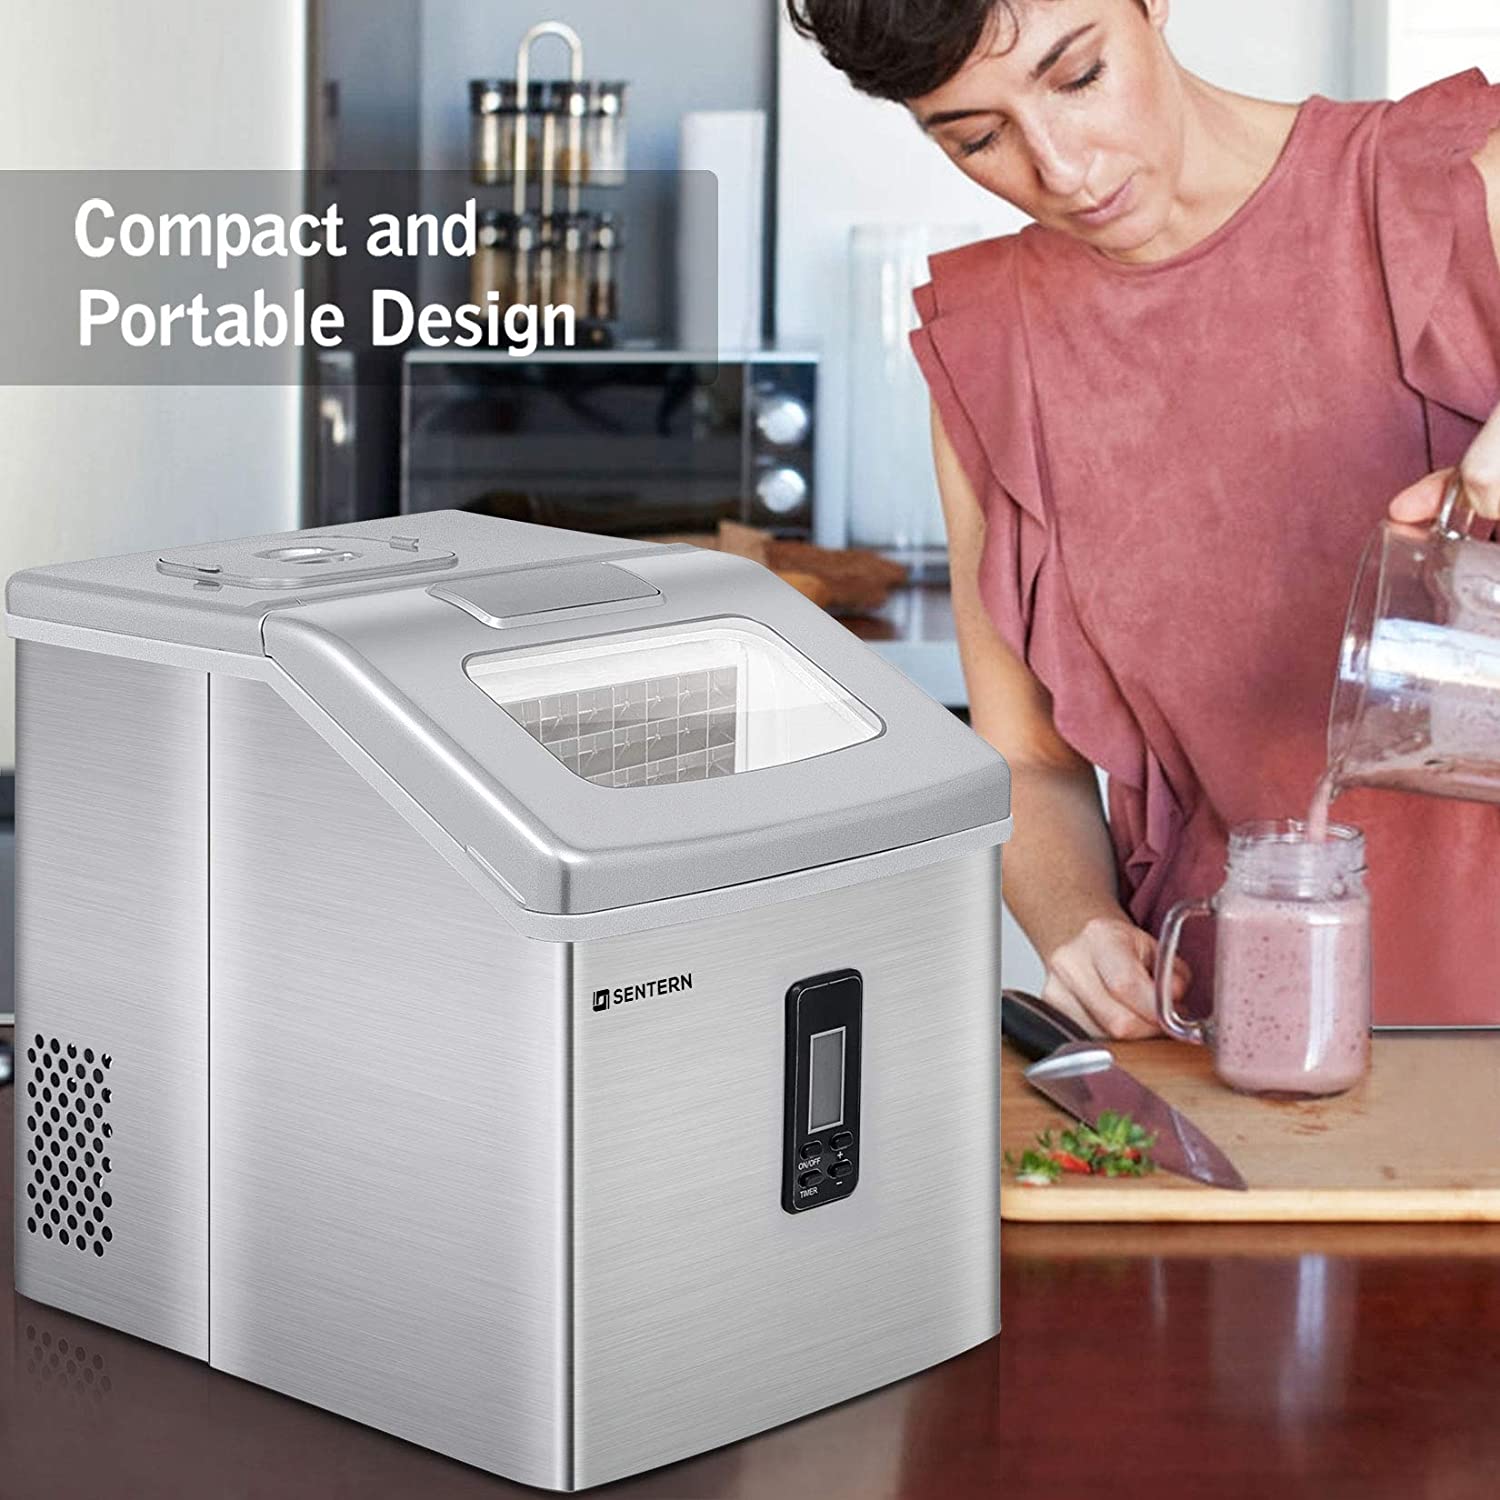 10 Best Extra Large Portable Ice Maker with More Production Storage (33Lb, 40Lb, 48Lb, 50Lb) in 2022 Review All In One Cooling Gear Lab: Any Refrigerators Air Conditioners Freezers Ice Makers Coolers Fans Reviewed And Compared.